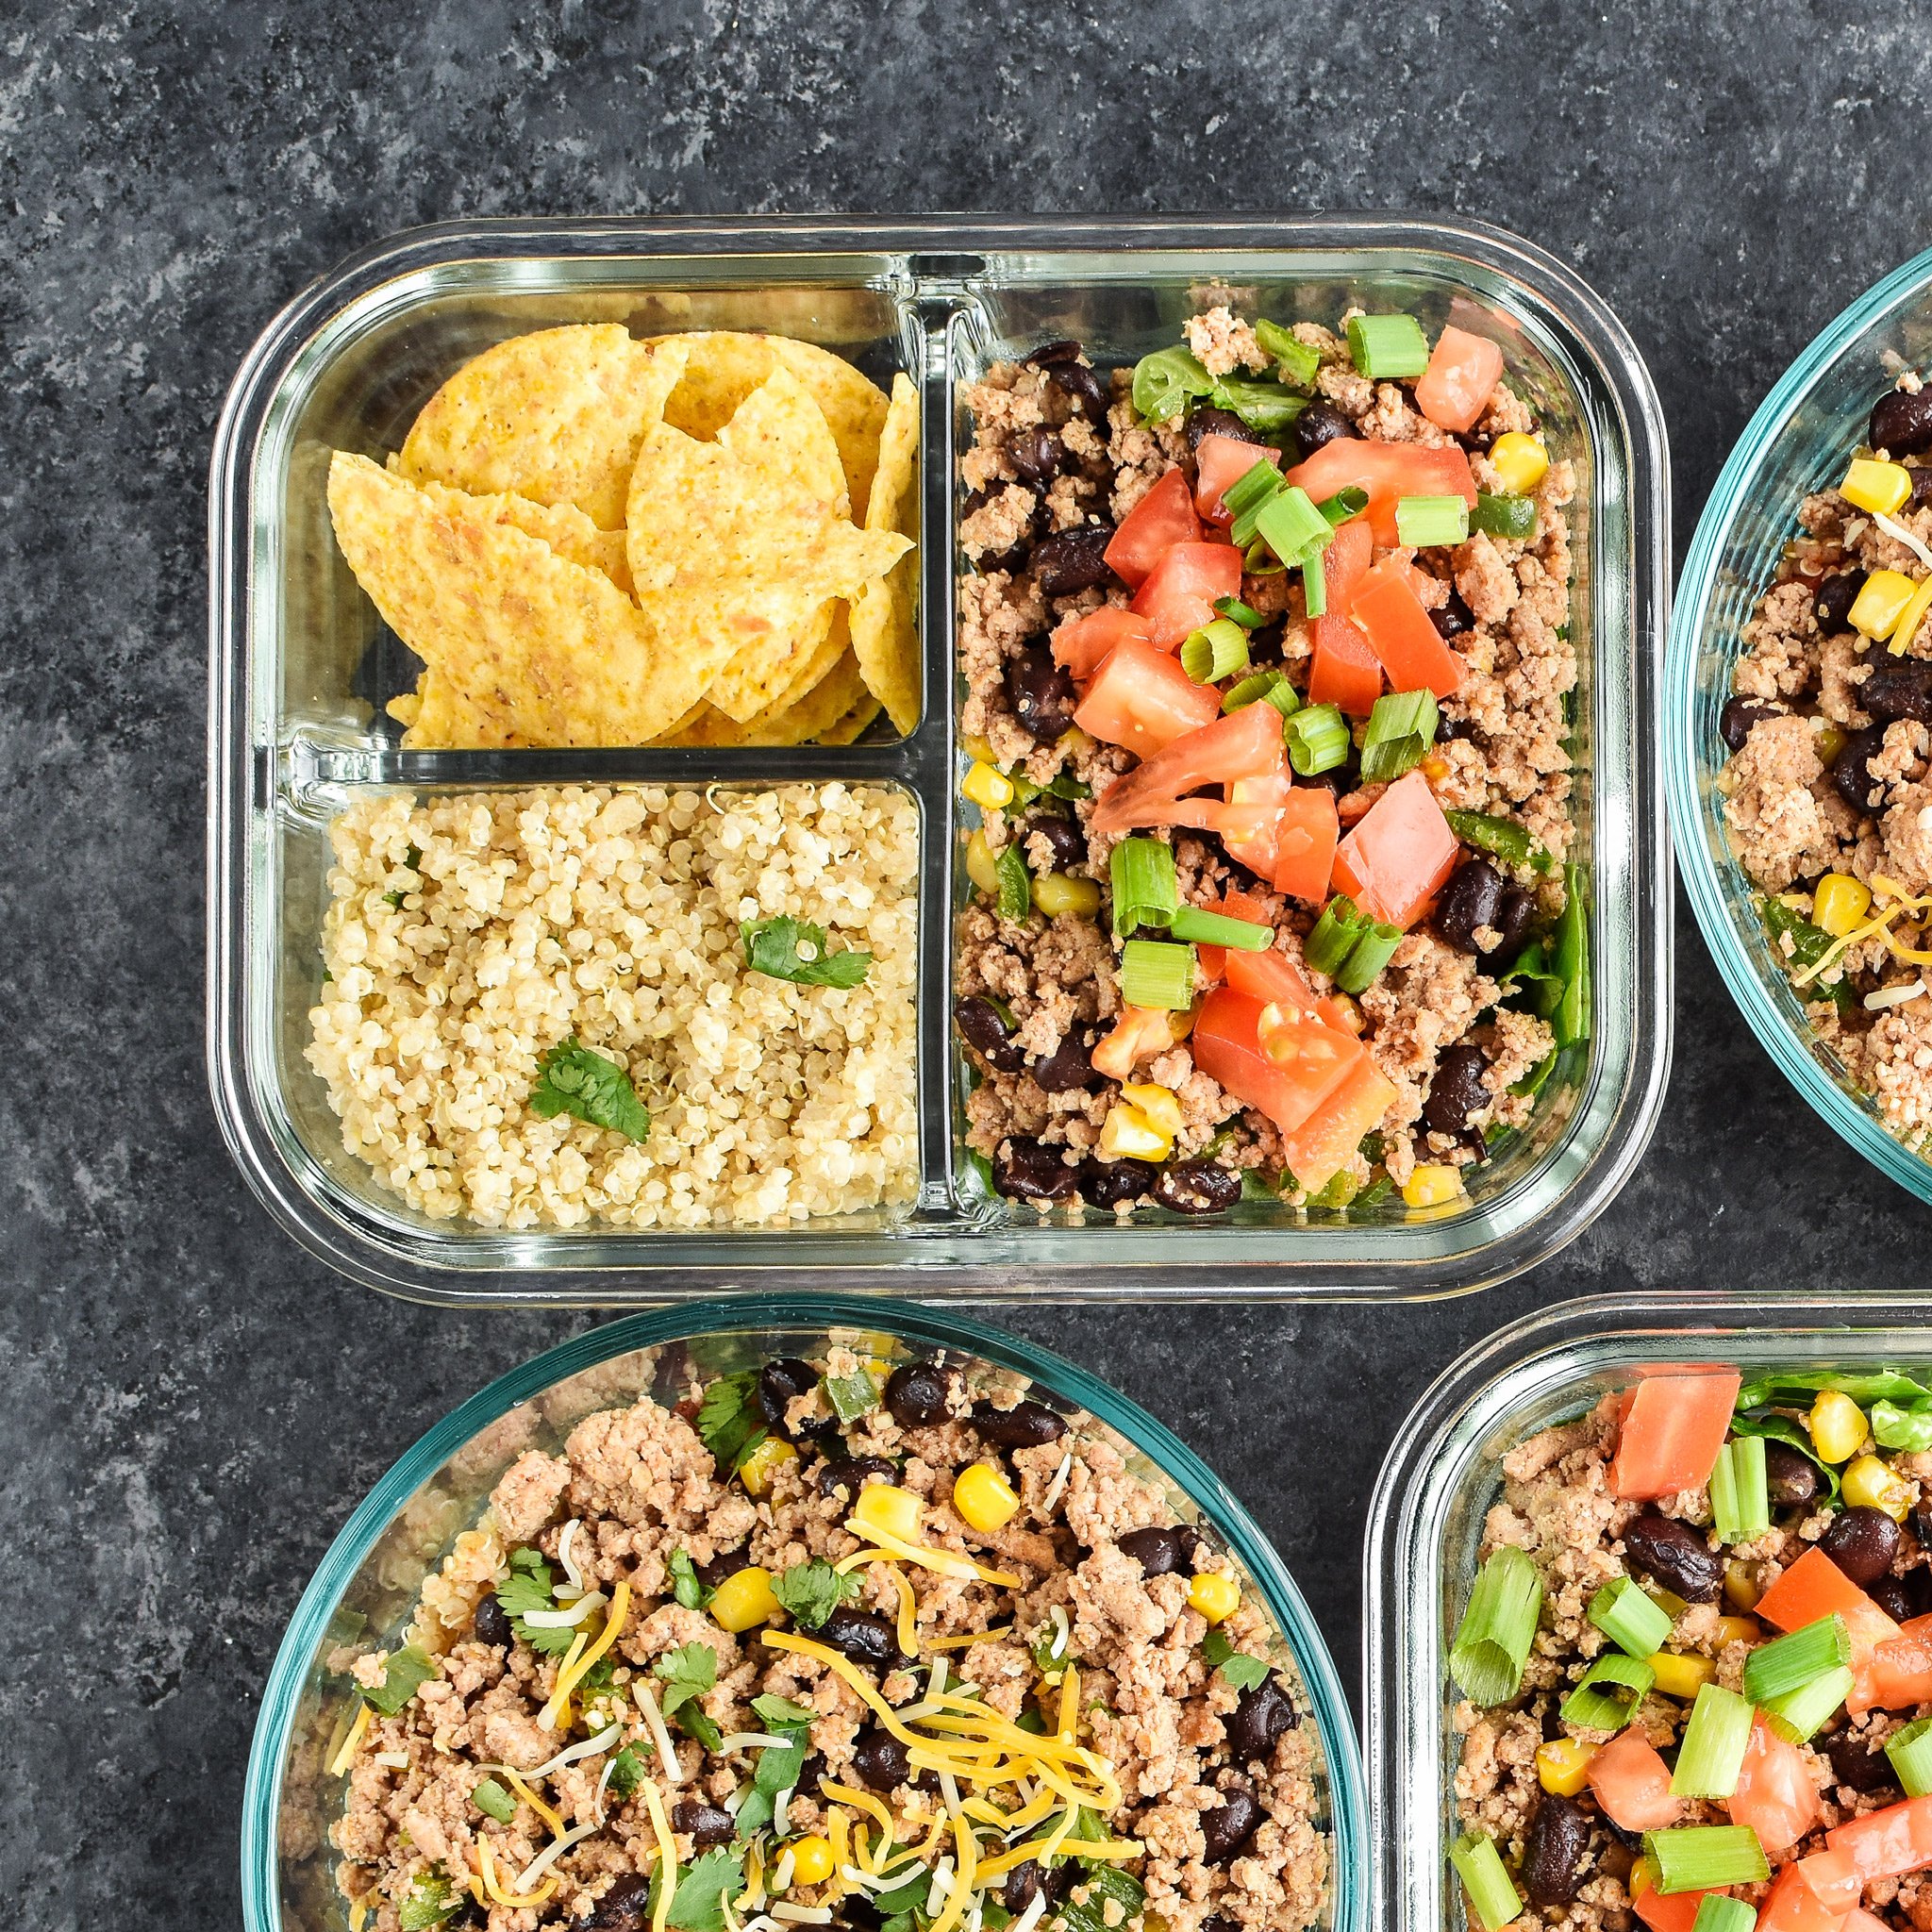 Meal prepped lunches viewed from above for Hot & Cold Turkey Taco Meal Prep; two taco salads with quinoa and chips on the side and two taco bowls with tomato and green chili quinoa.